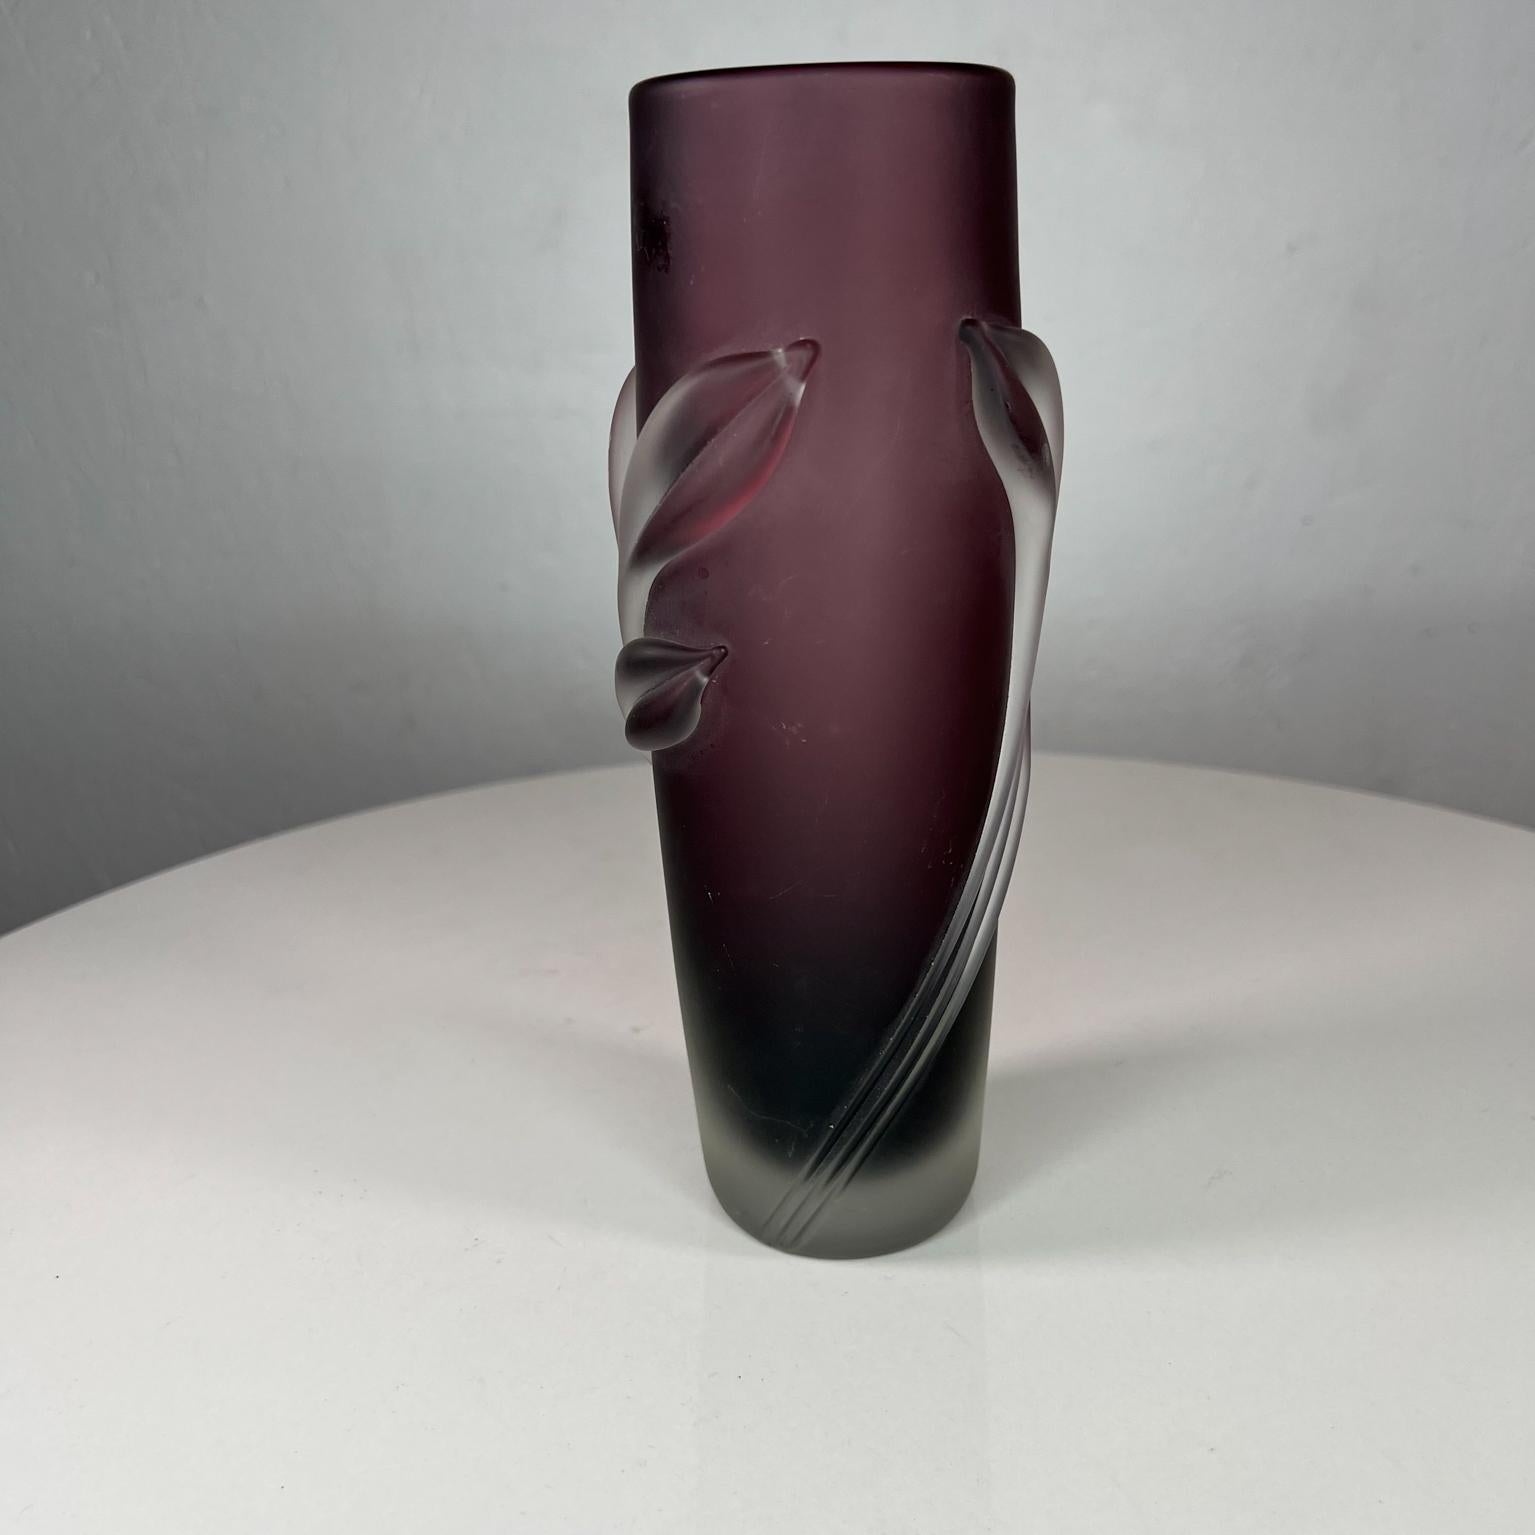 American 1980s Satin Sheen Frosted Art Glass Purple Vase by William Glasner New York